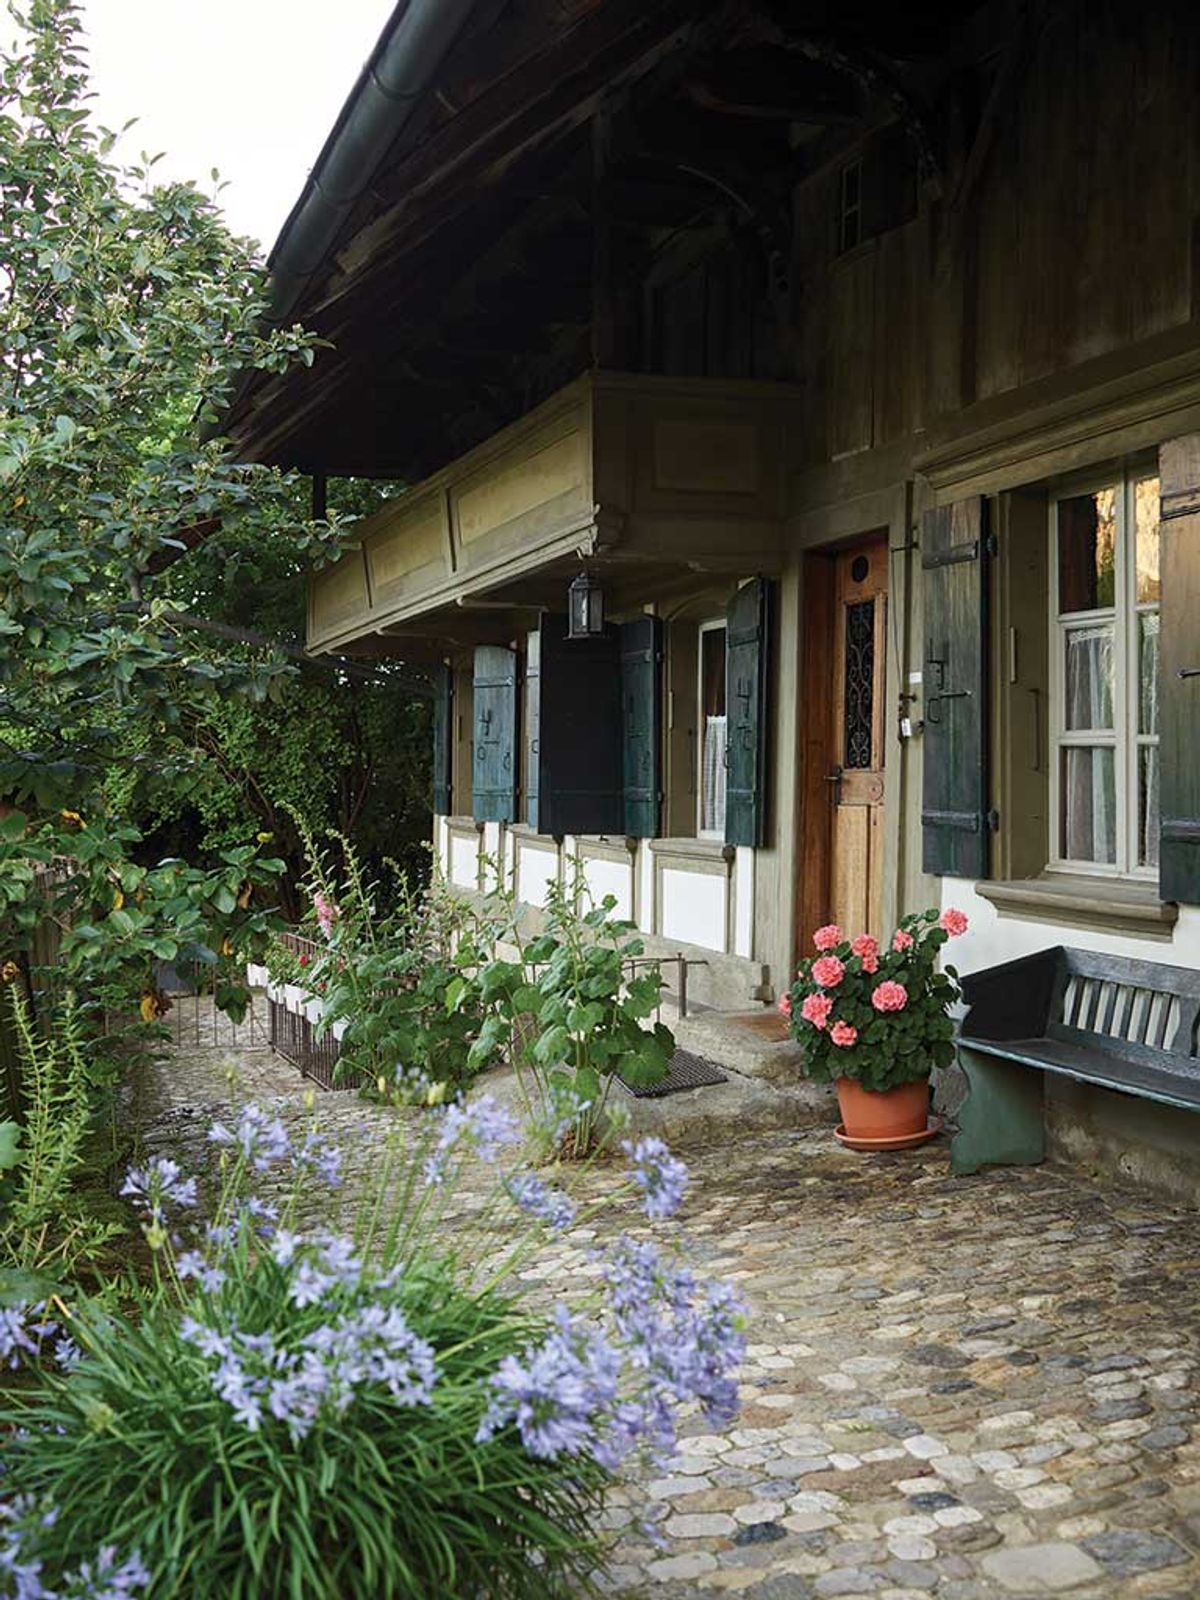 Almost untouched for a century, Swiss painter Albert Anker’s rural home ...